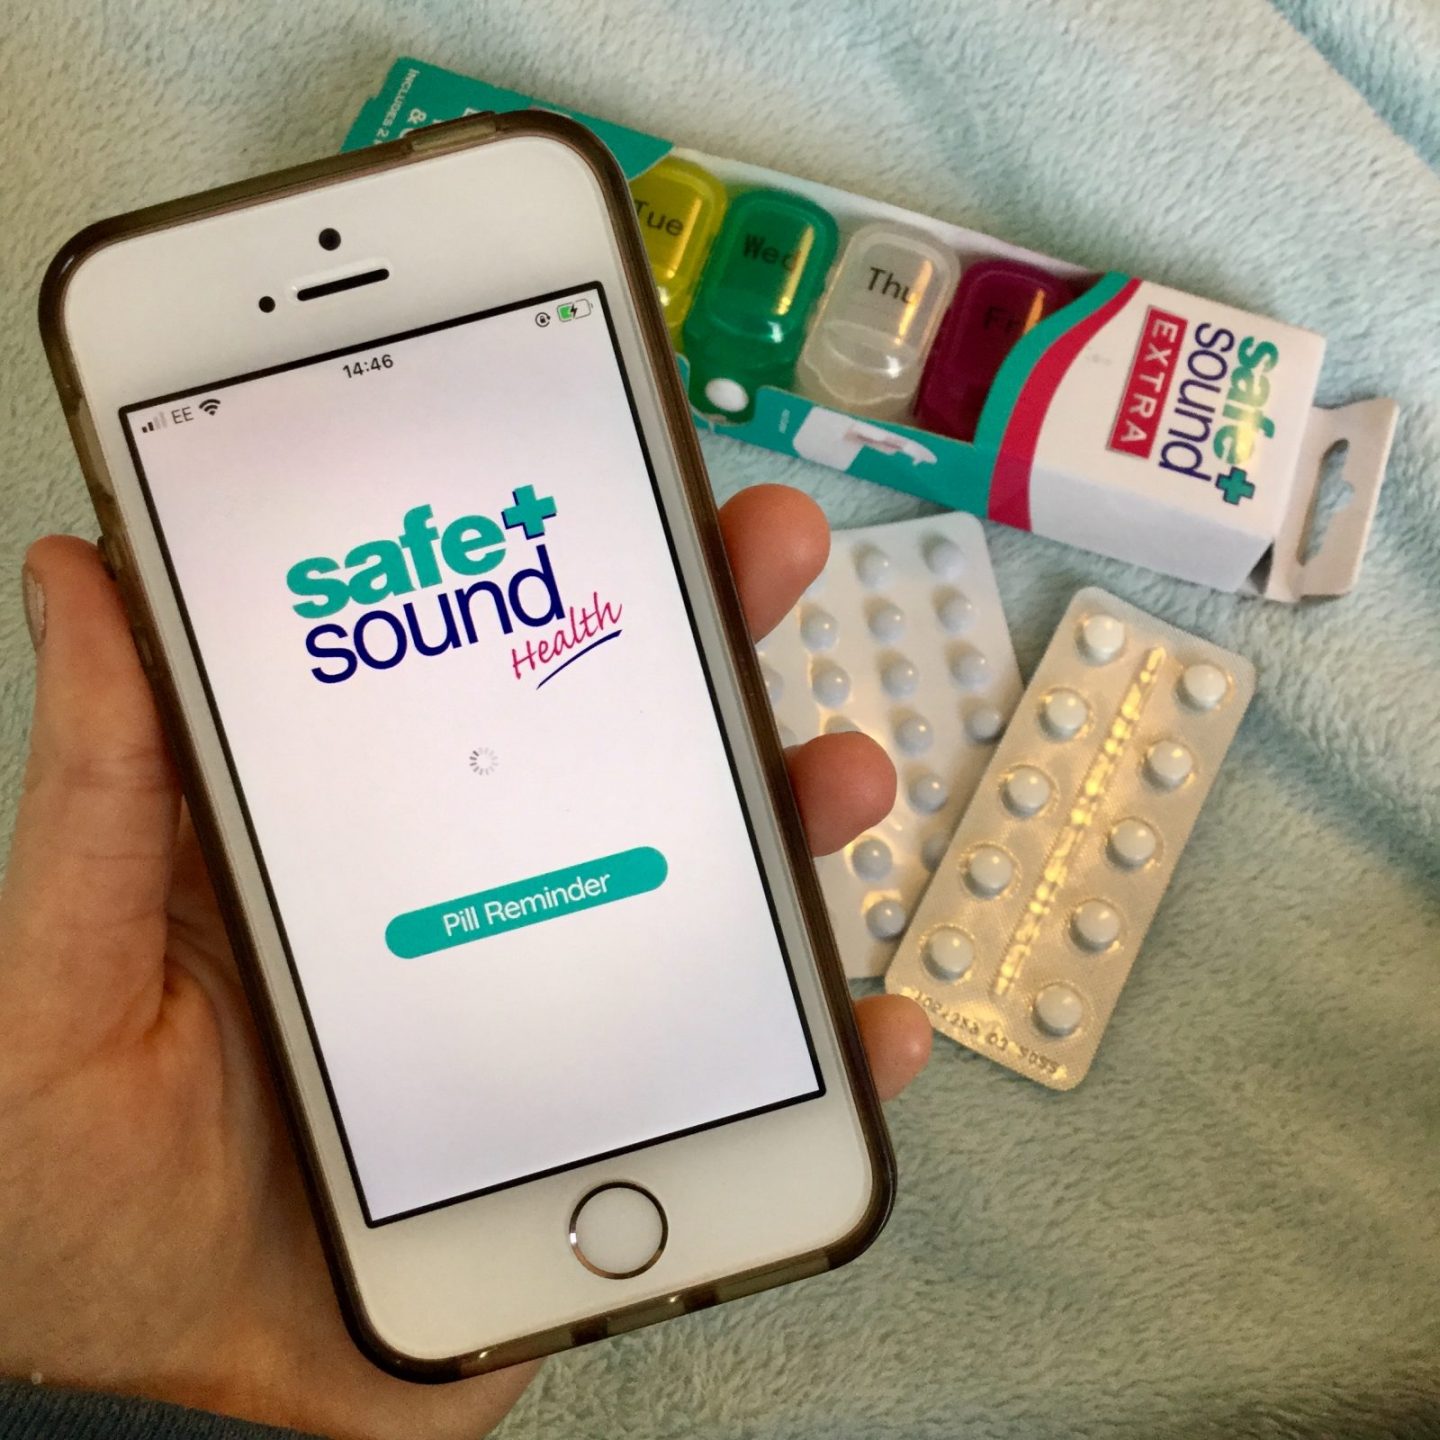 pippa's hand holding iphone displaying safe and sound medication reminder app, with pill box and tablets visible in the background